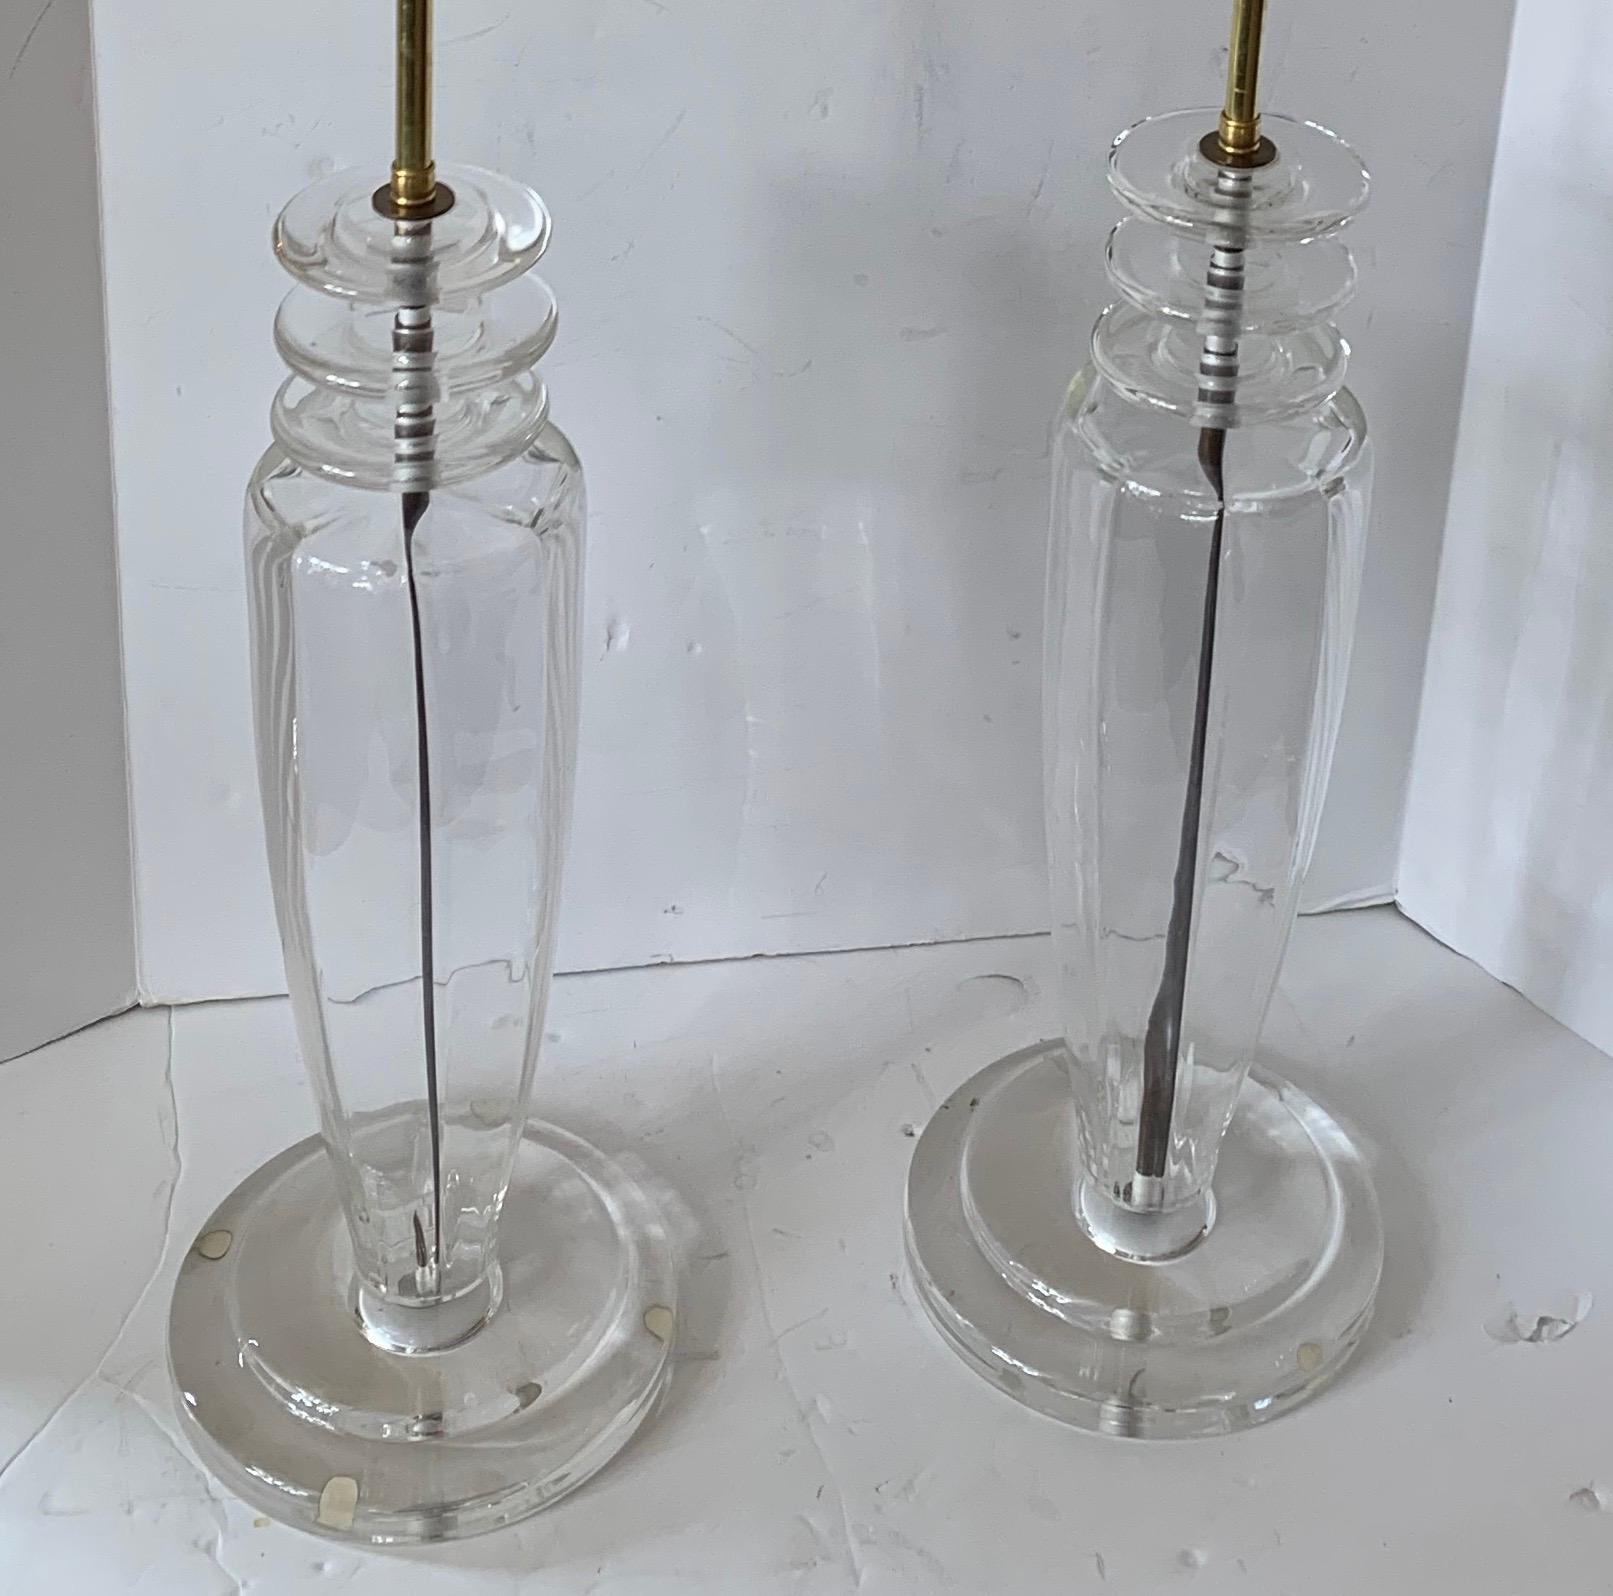 A wonderful pair of Lorin Marsh Mid-Century Modern Italian clear Murano glass and brass disco lamps
Rewired and ready to enjoy.